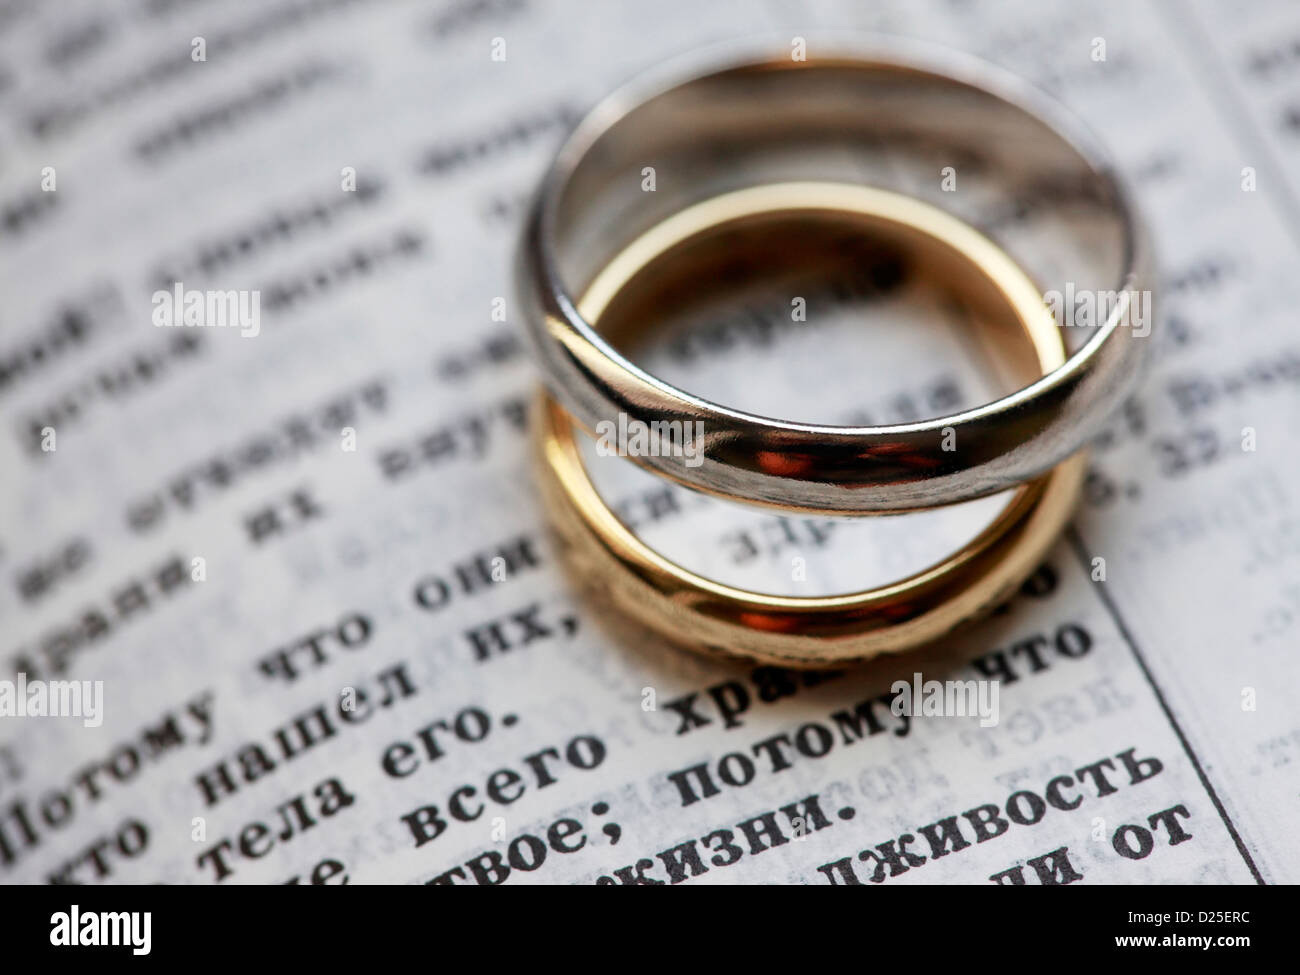 Wedding rings and the bible in Russian Stock Photo